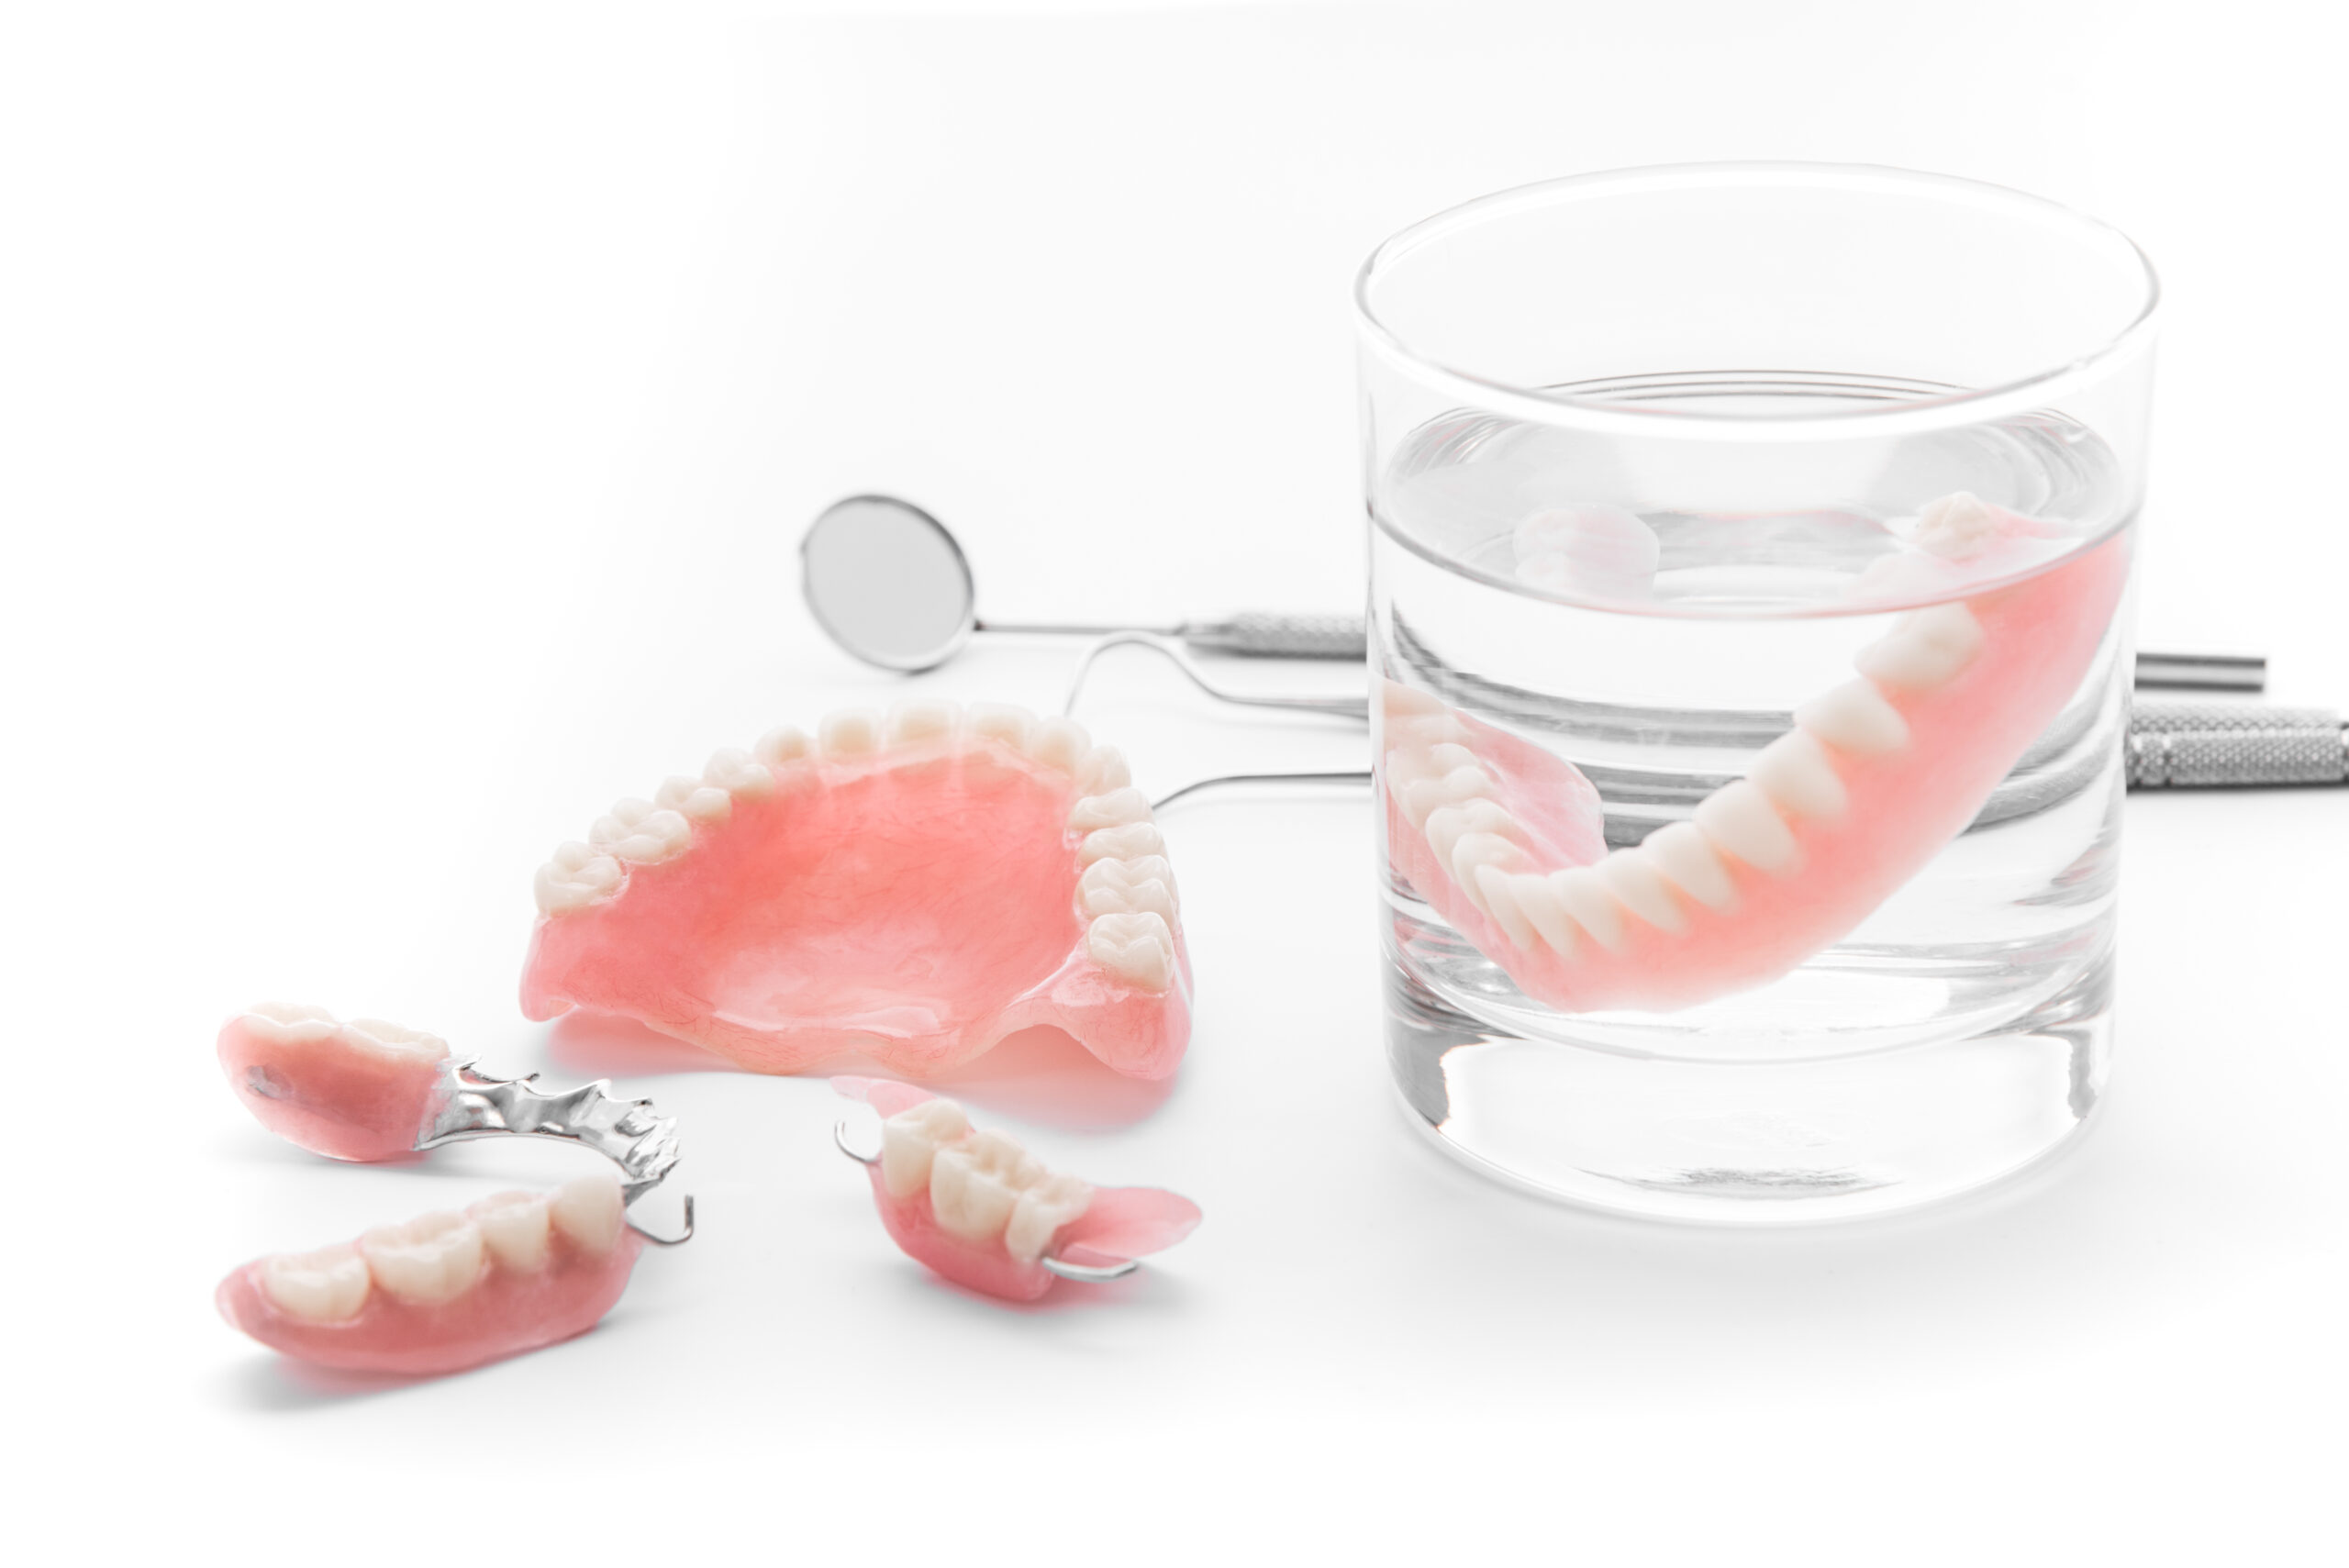 Set,Of,Denture,In,Glass,Of,Water,And,Tools,On